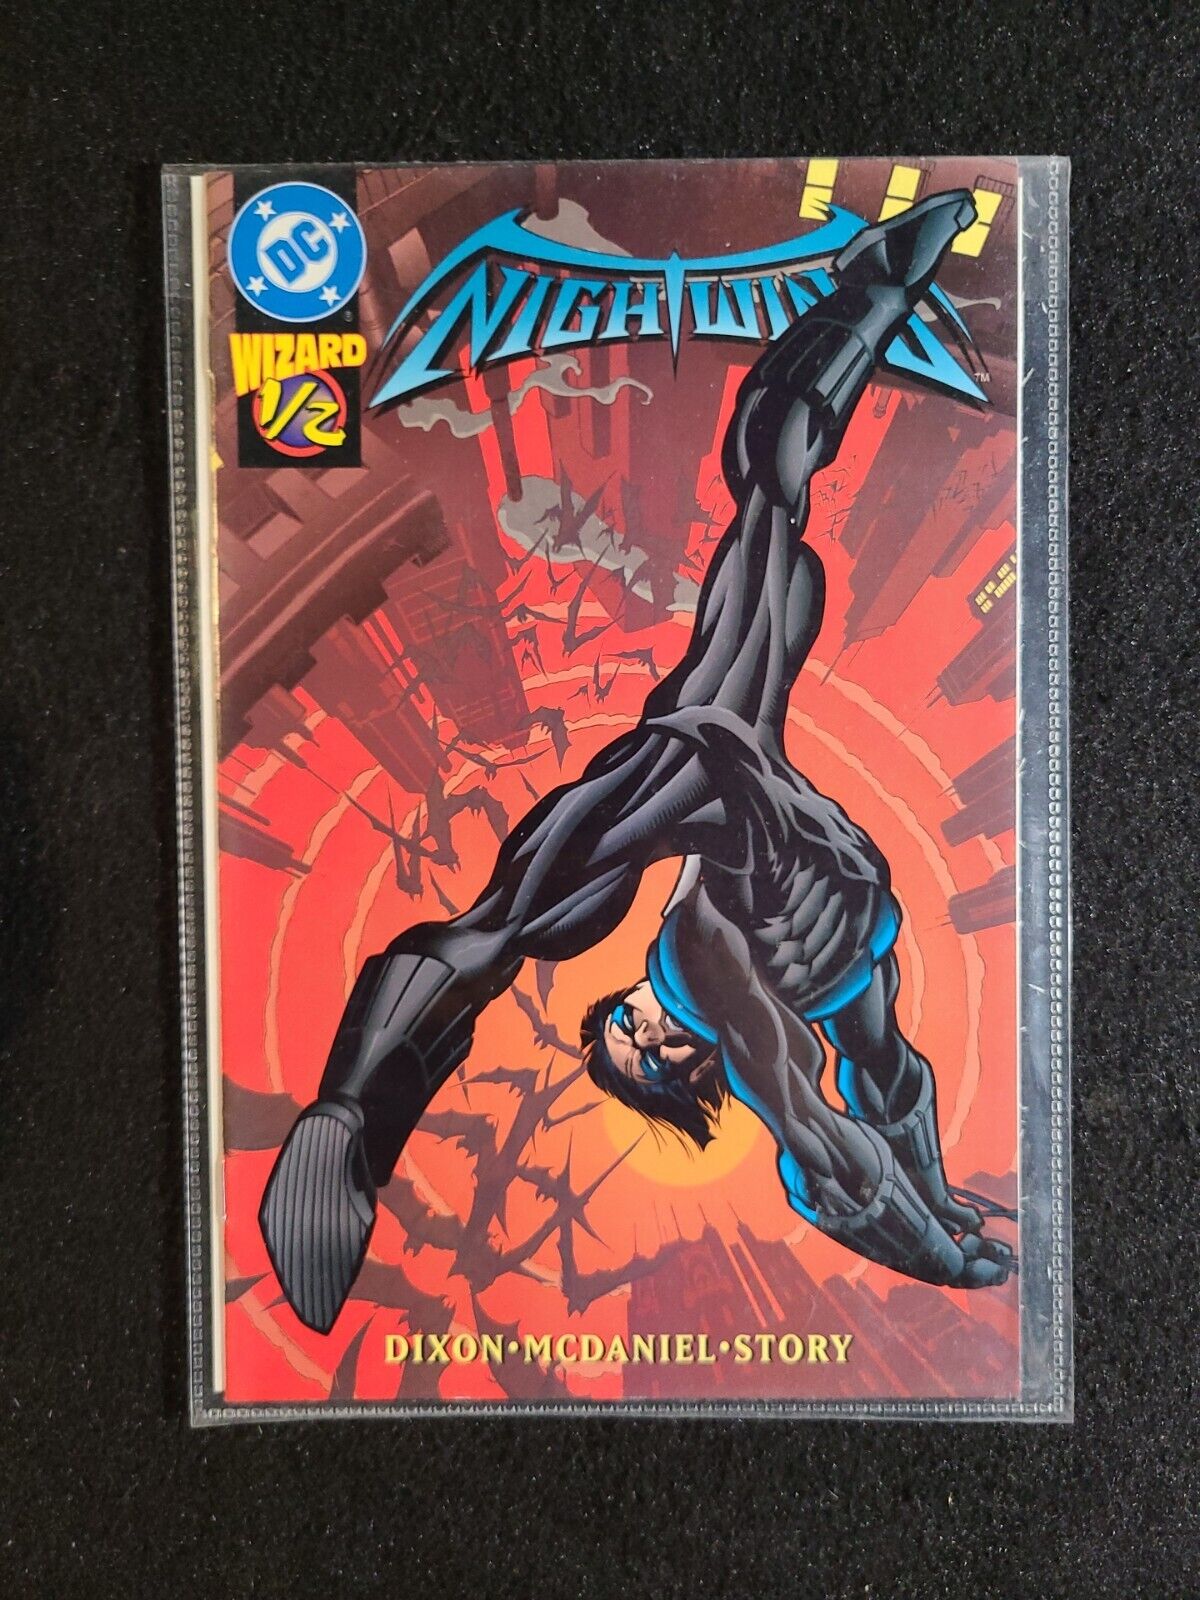 Nightwing #1/2 Wizard The Guide To Comics #77 1997 DC Mail Away Exclusive W COA 